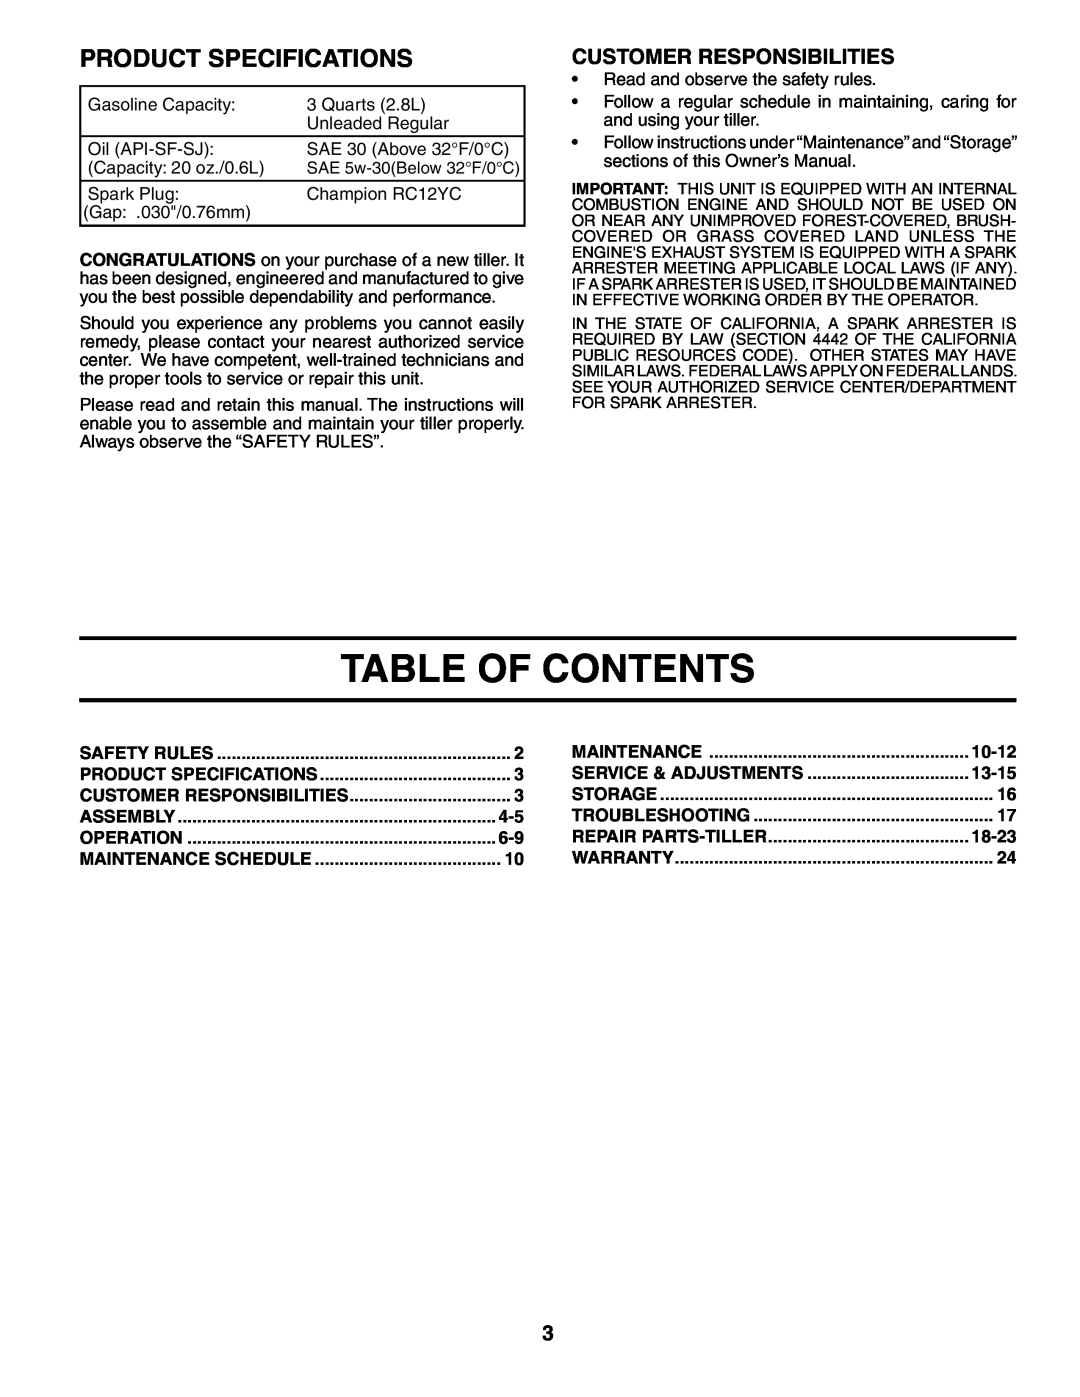 Poulan AGF550A owner manual Table Of Contents, Product Specifications, Customer Responsibilities, 10-12, 13-15, 18-23 